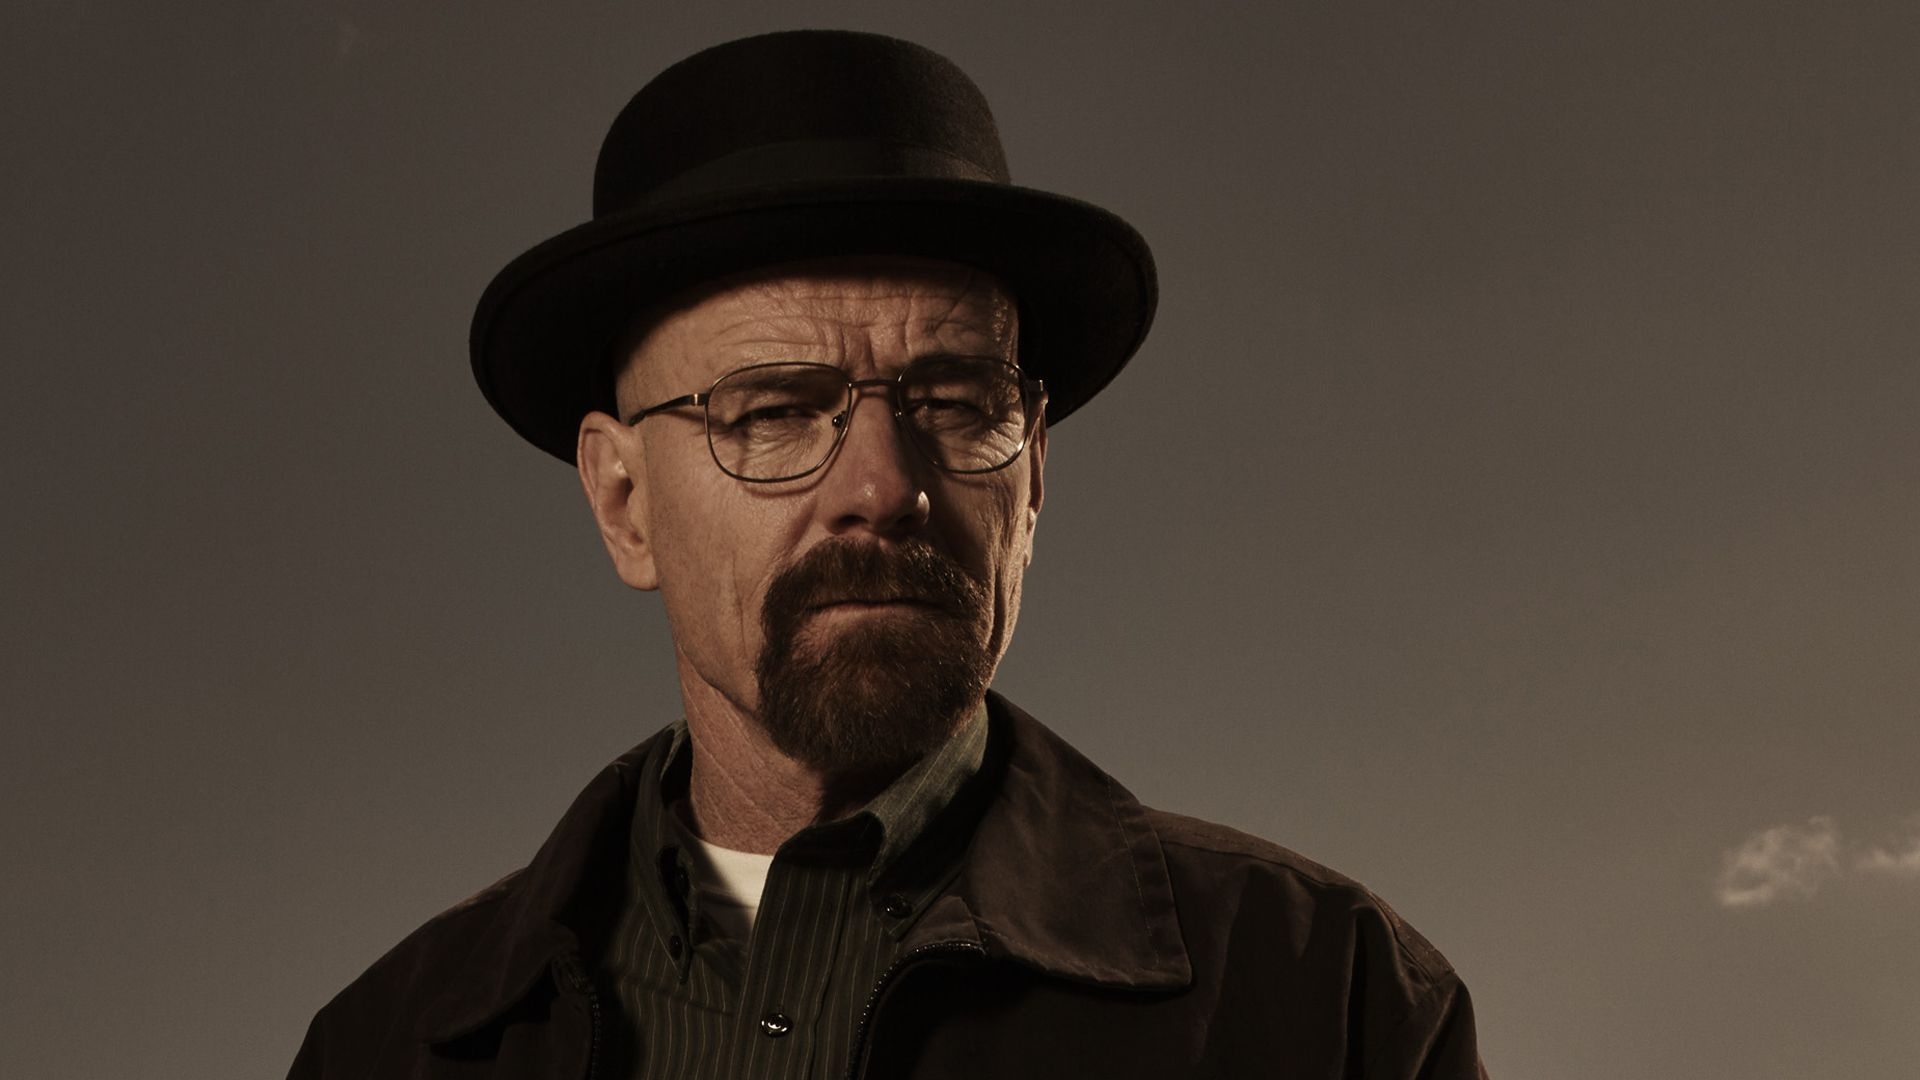 Bryan Cranston: Appeared in the ninth season of the HBO comedy series Curb Your Enthusiasm. 1920x1080 Full HD Wallpaper.